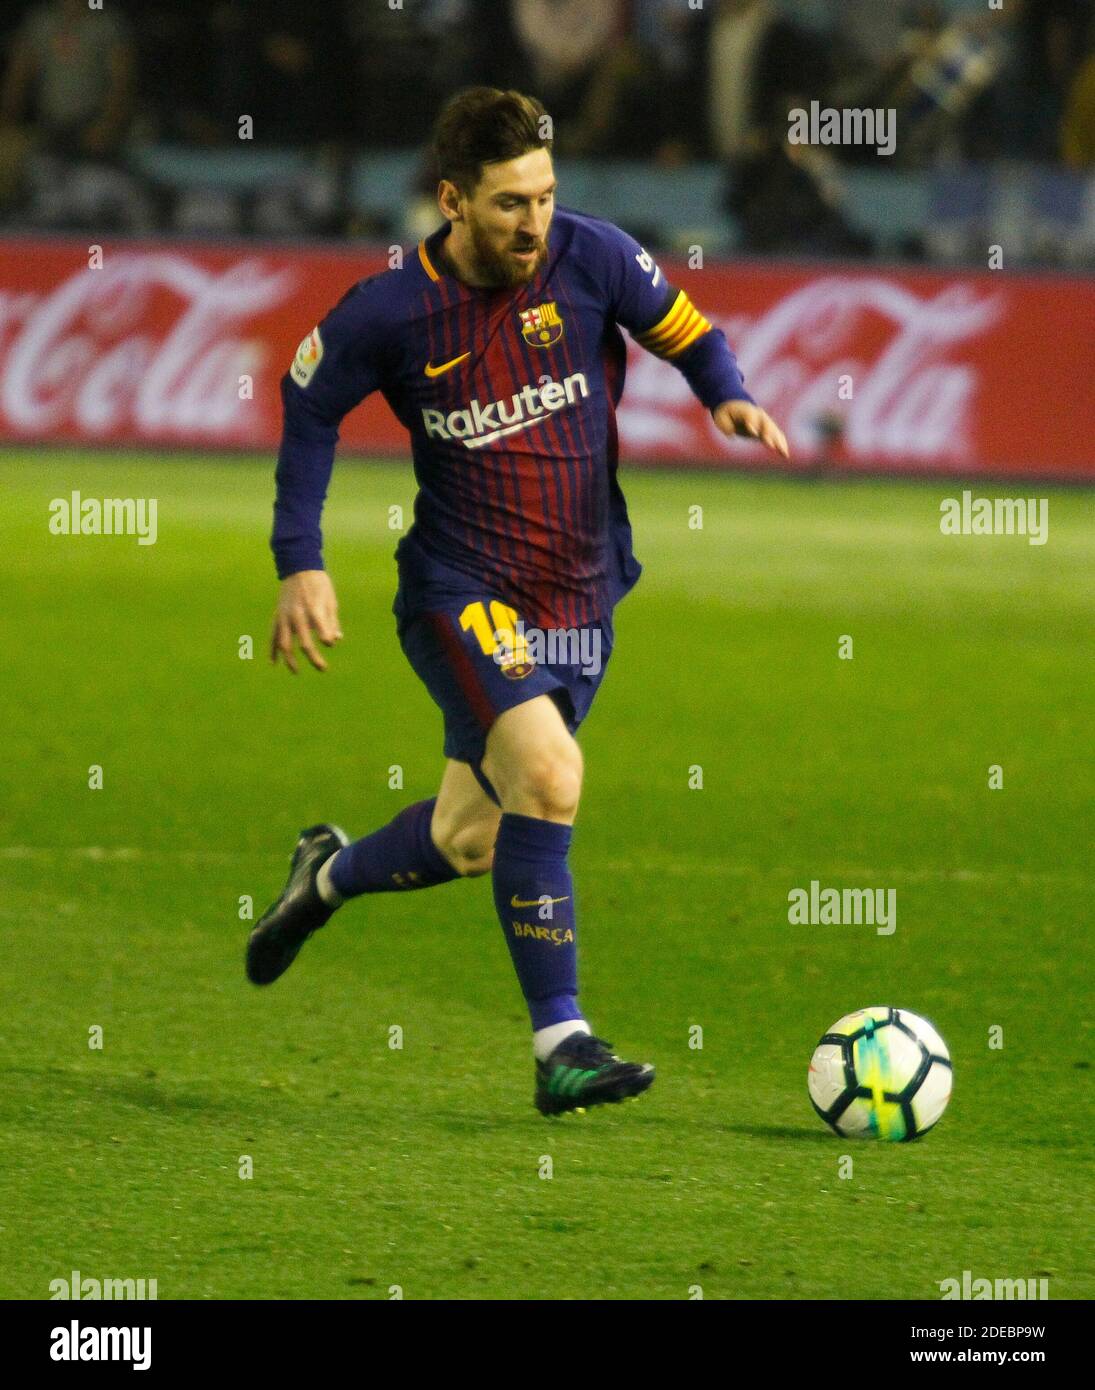 Leo Messi, player of the Barcelona football club with a ball during a match on April 17, 2018 Stock Photo